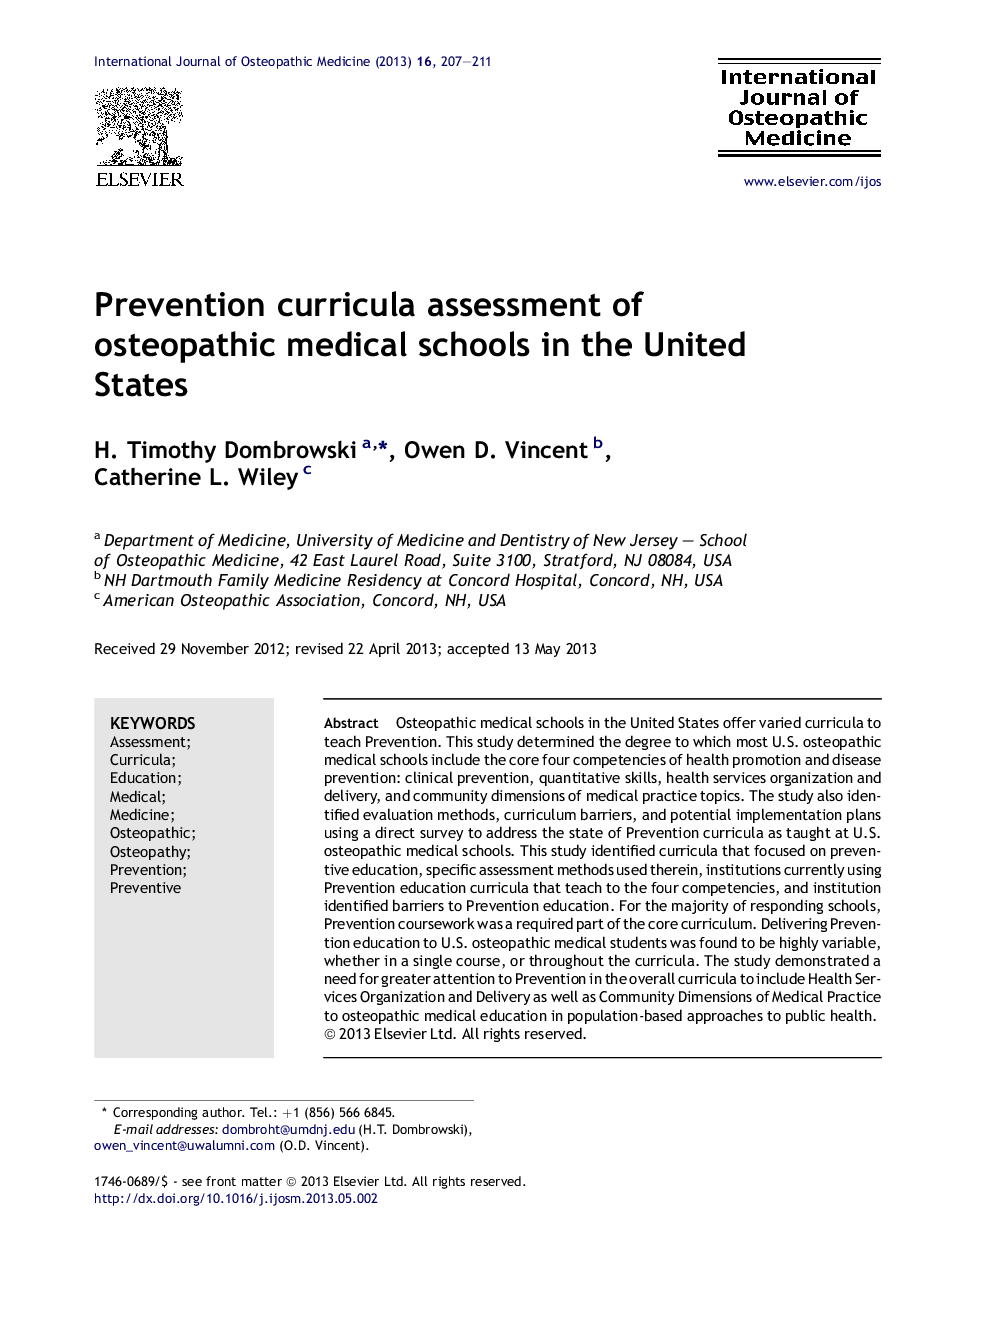 Prevention curricula assessment of osteopathic medical schools in the United States